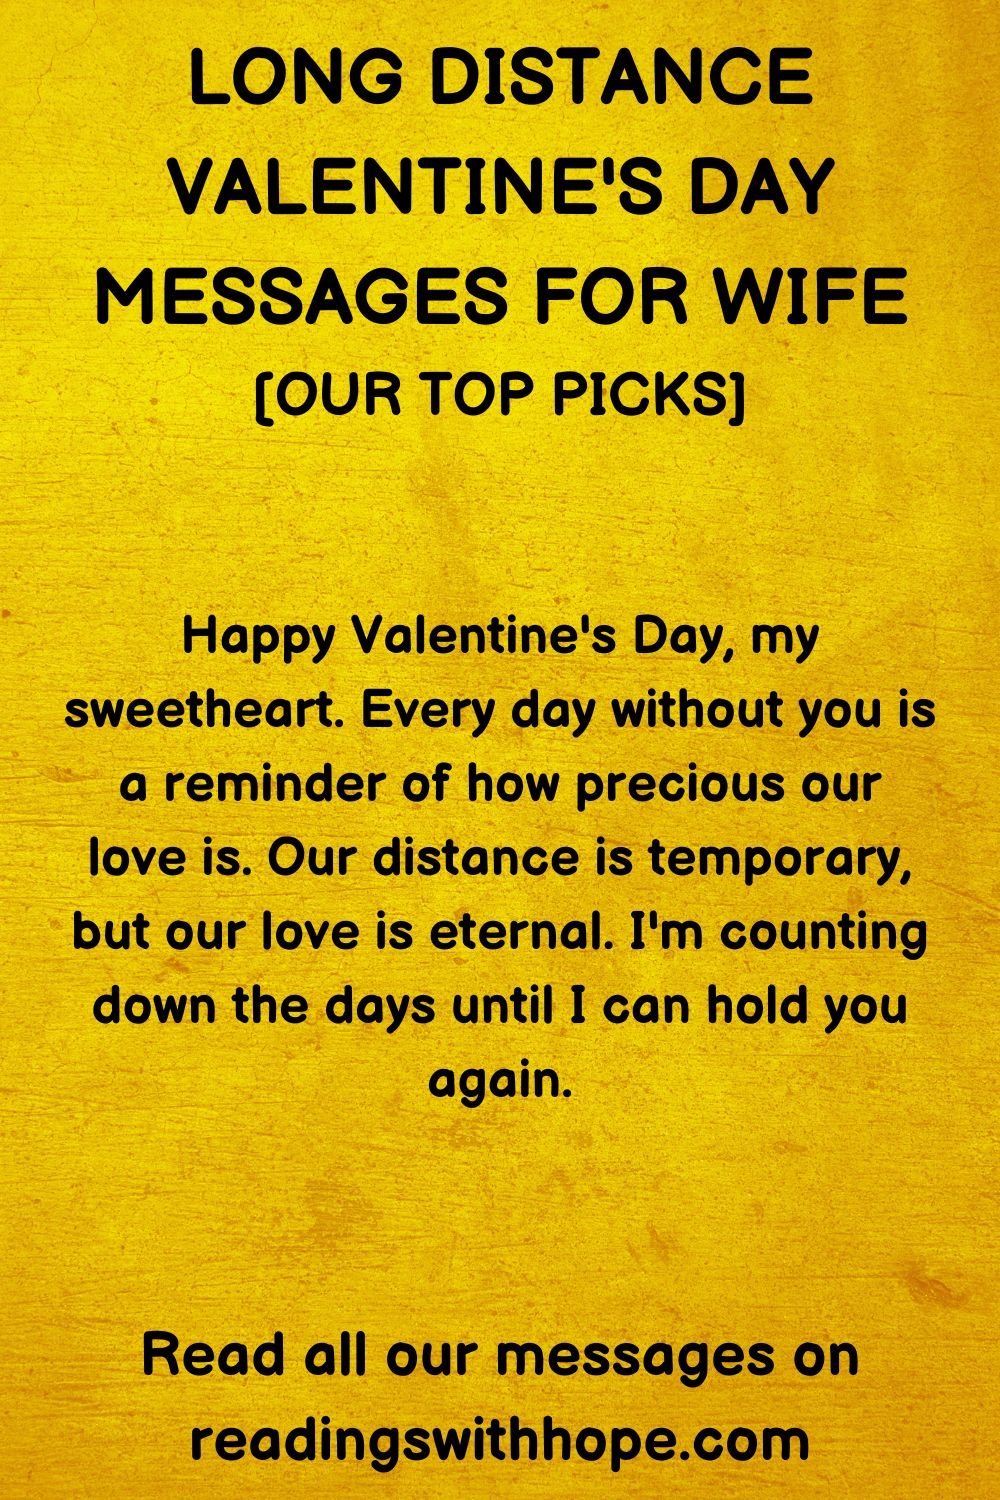 60 Valentine's Messages For Your Wife